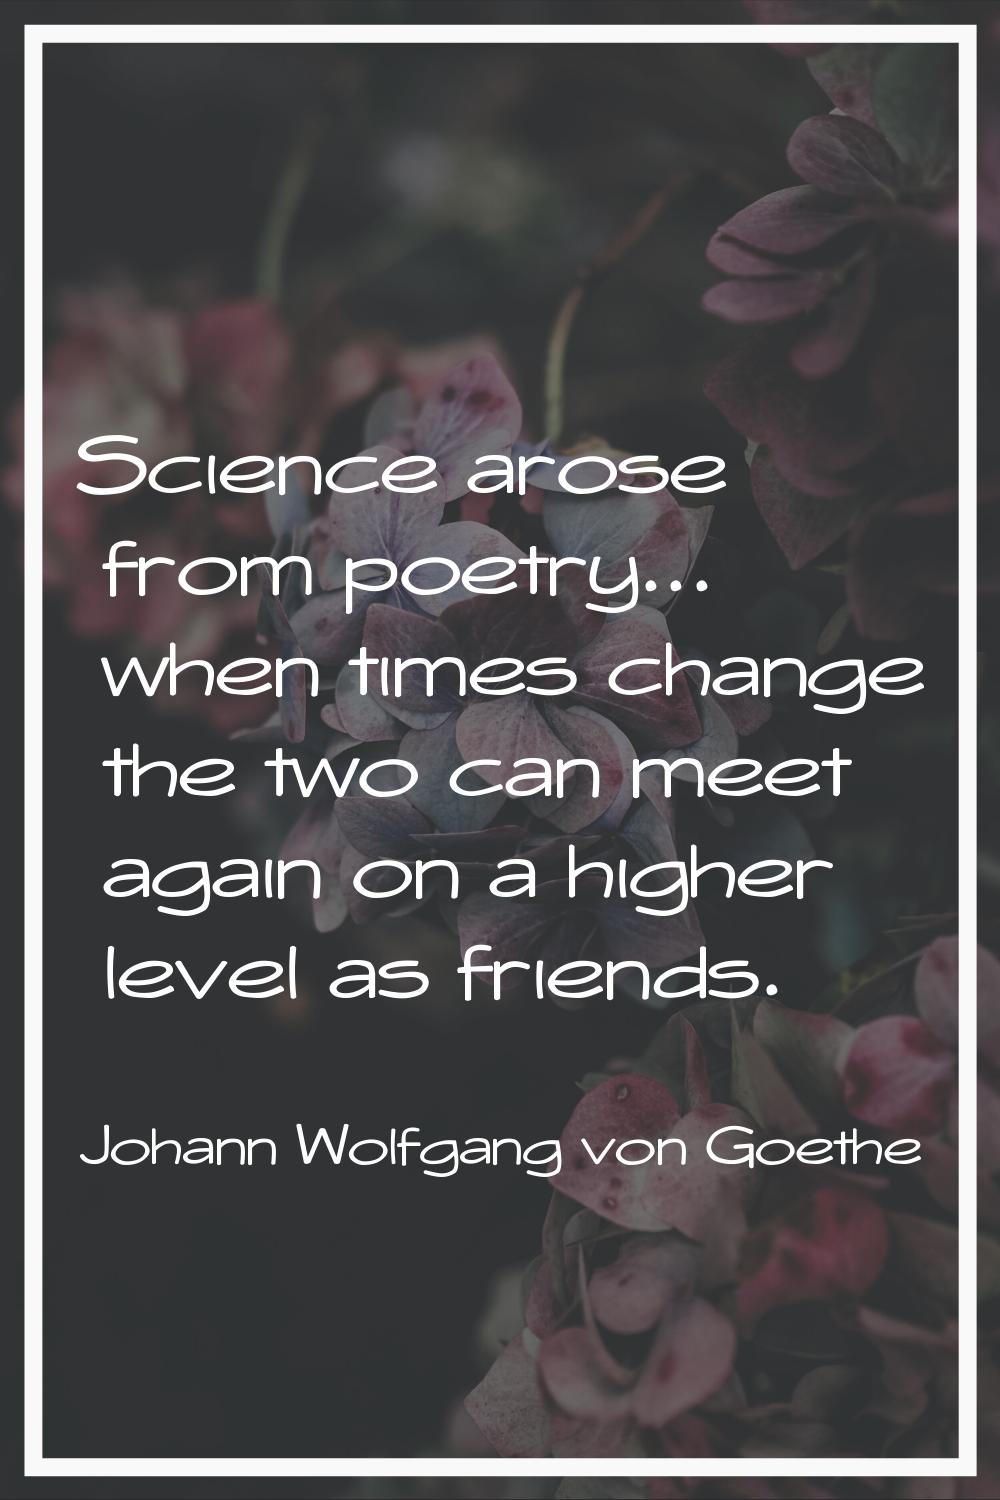 Science arose from poetry... when times change the two can meet again on a higher level as friends.